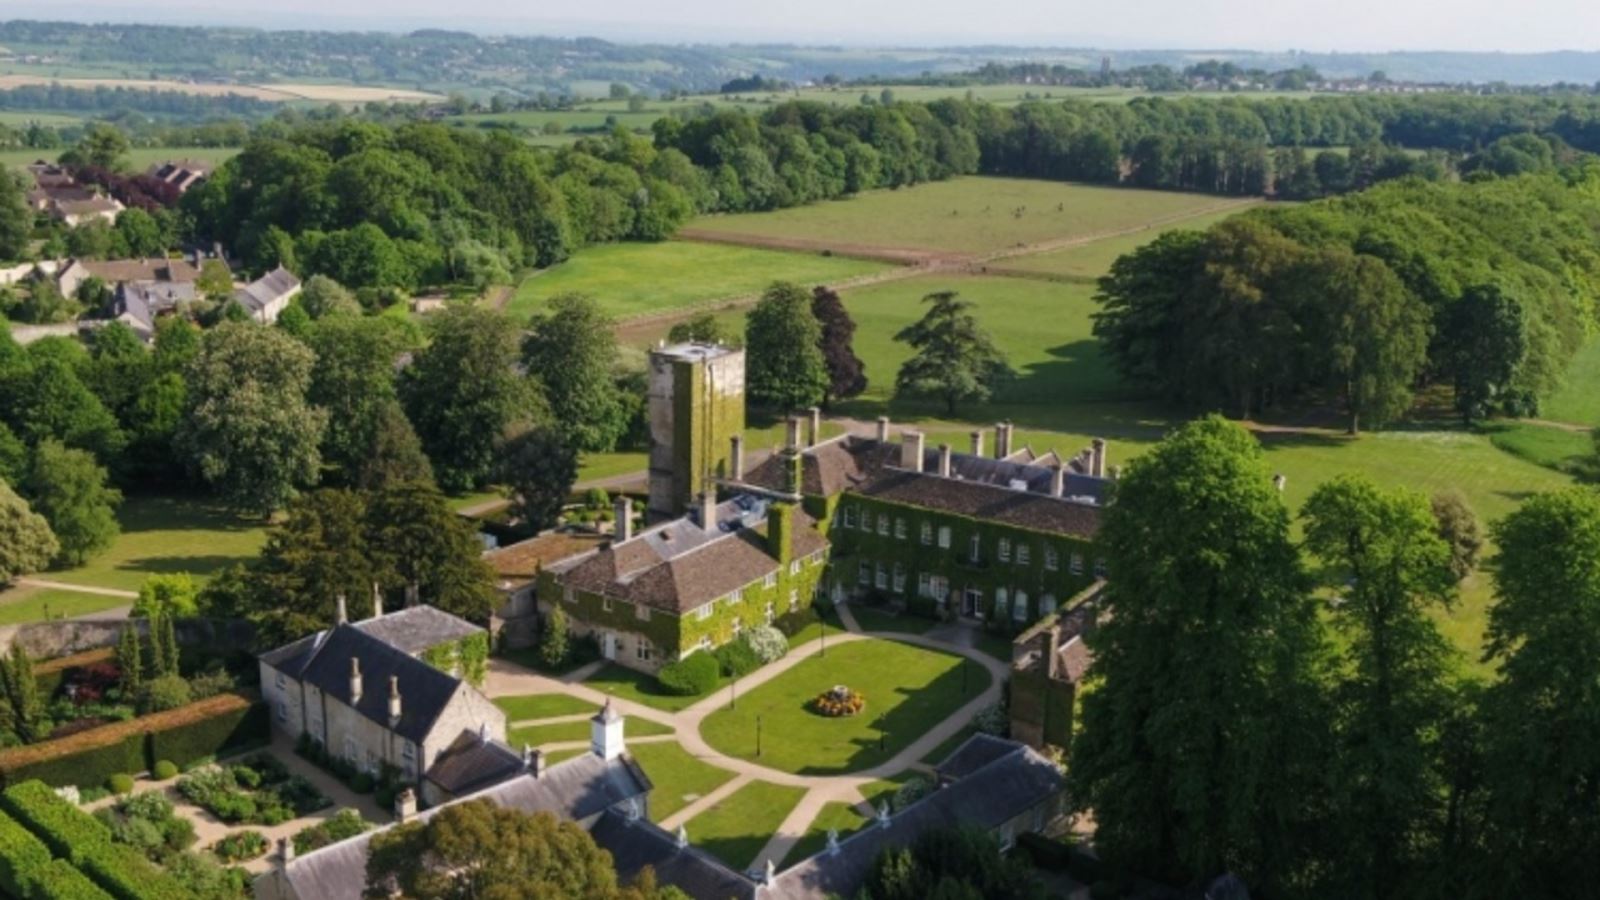 Aerial view of the hotel and grounds at Lucknam Park